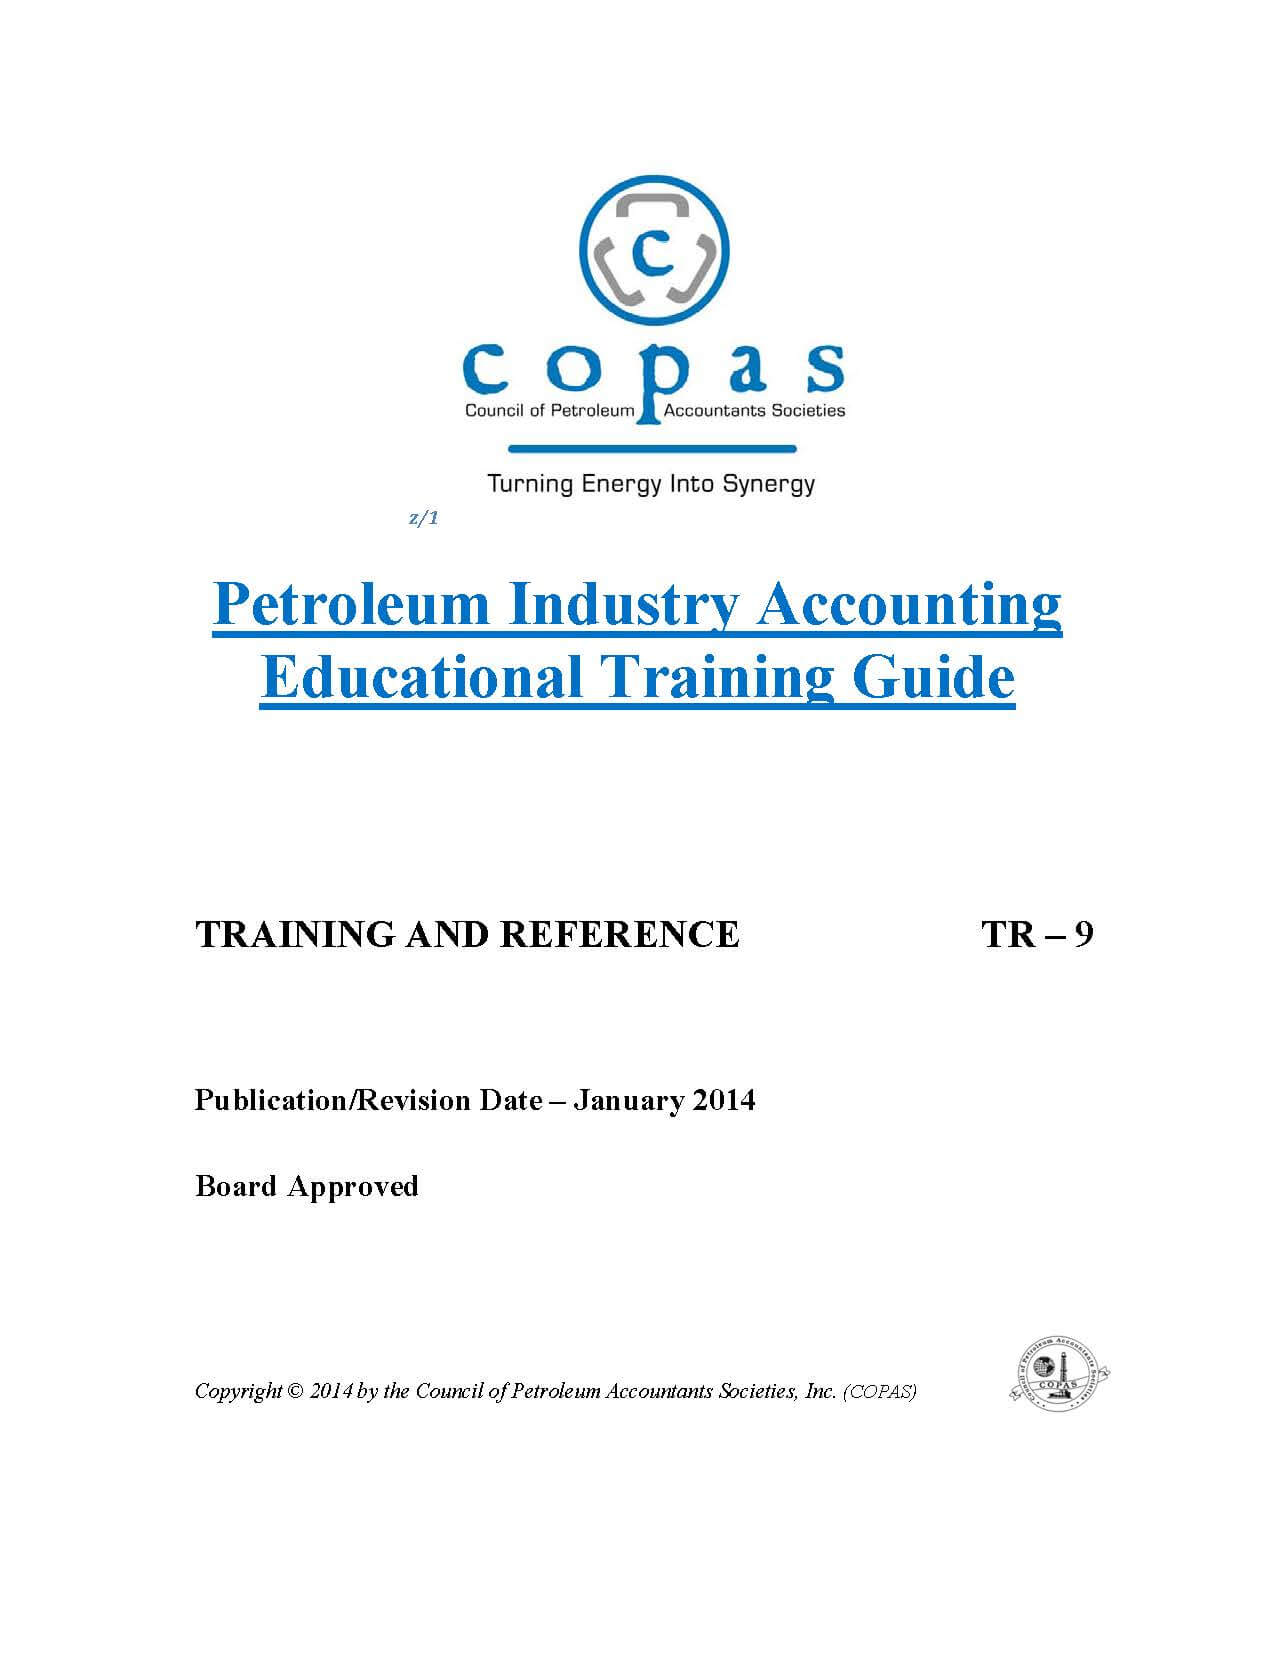 TR-9 Petroleum Industry Accounting Educational Training Guide